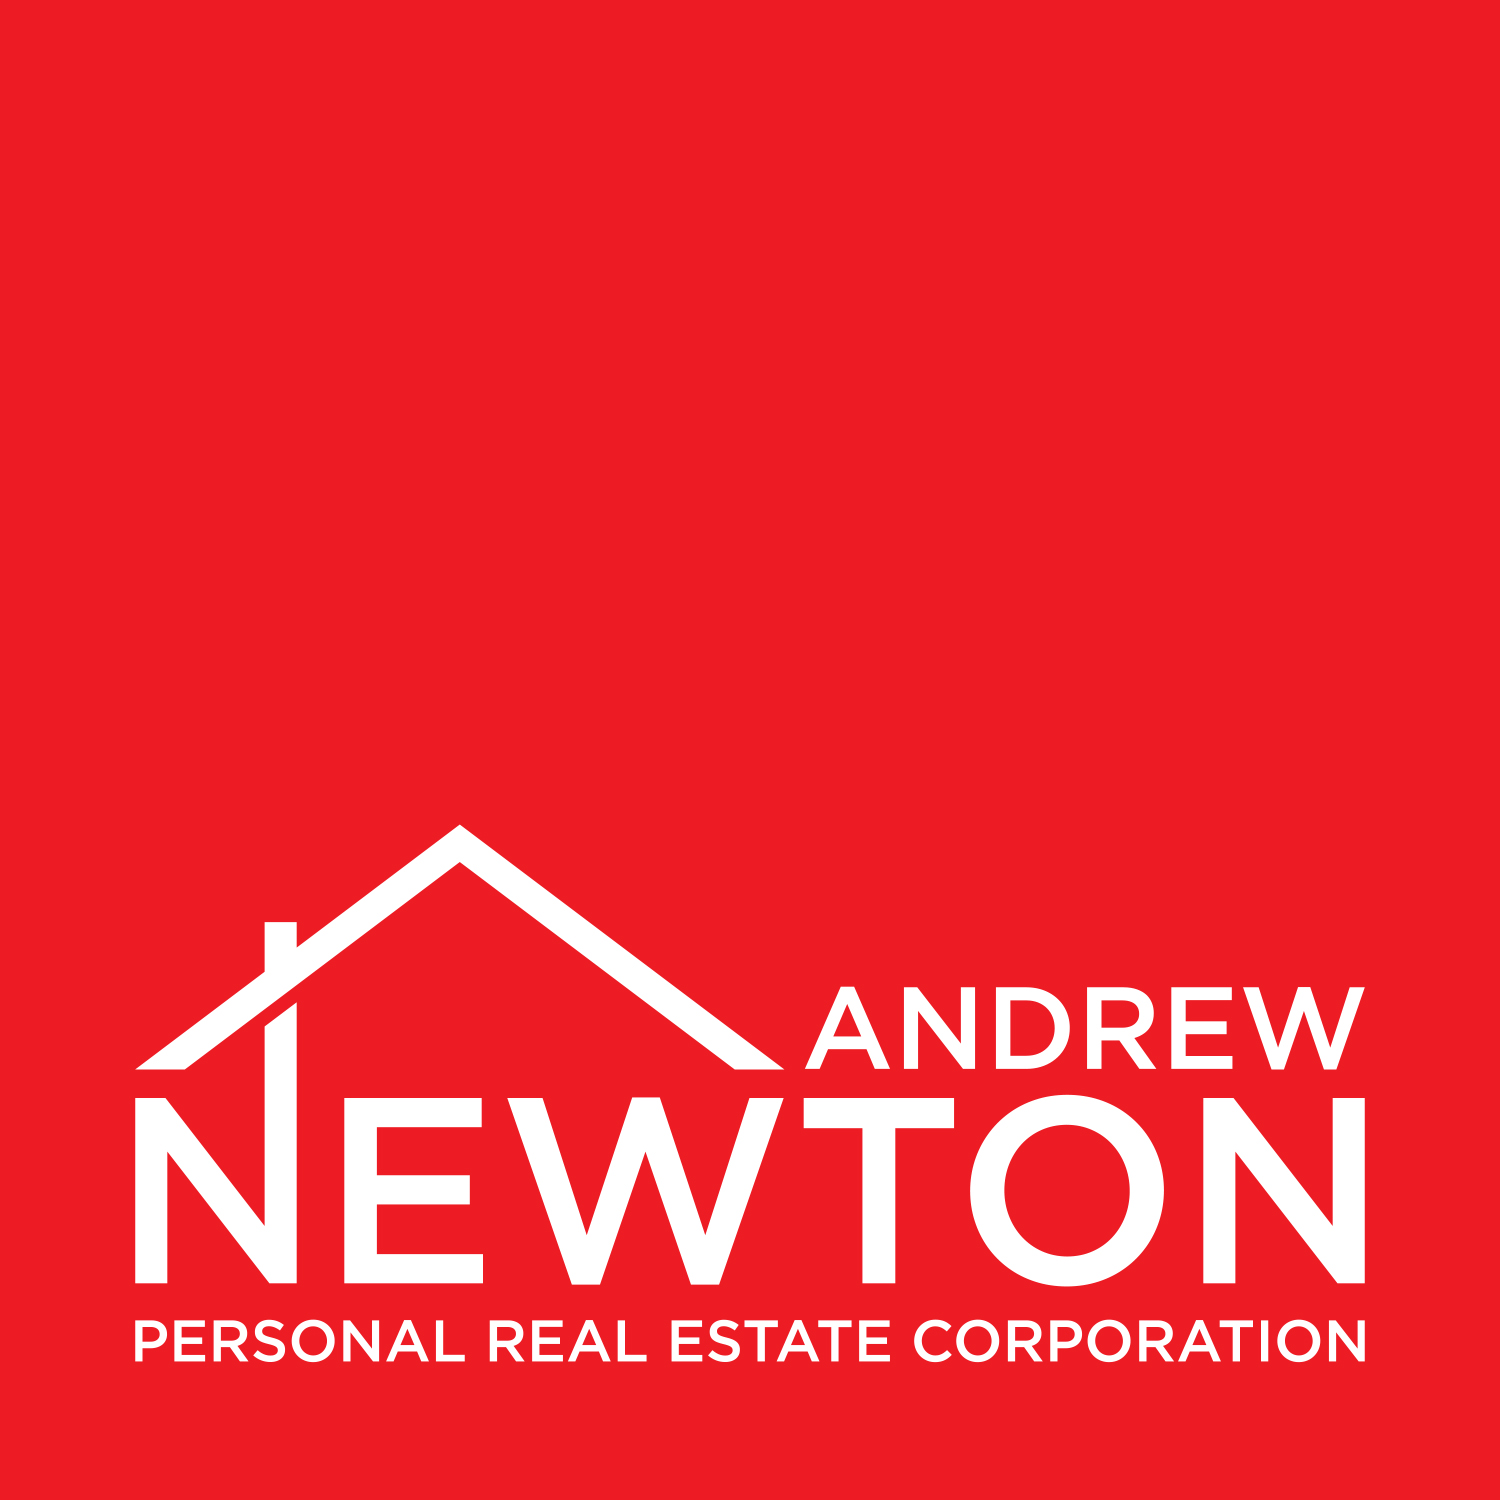 Andrew Newton Personal Real Estate Corporation